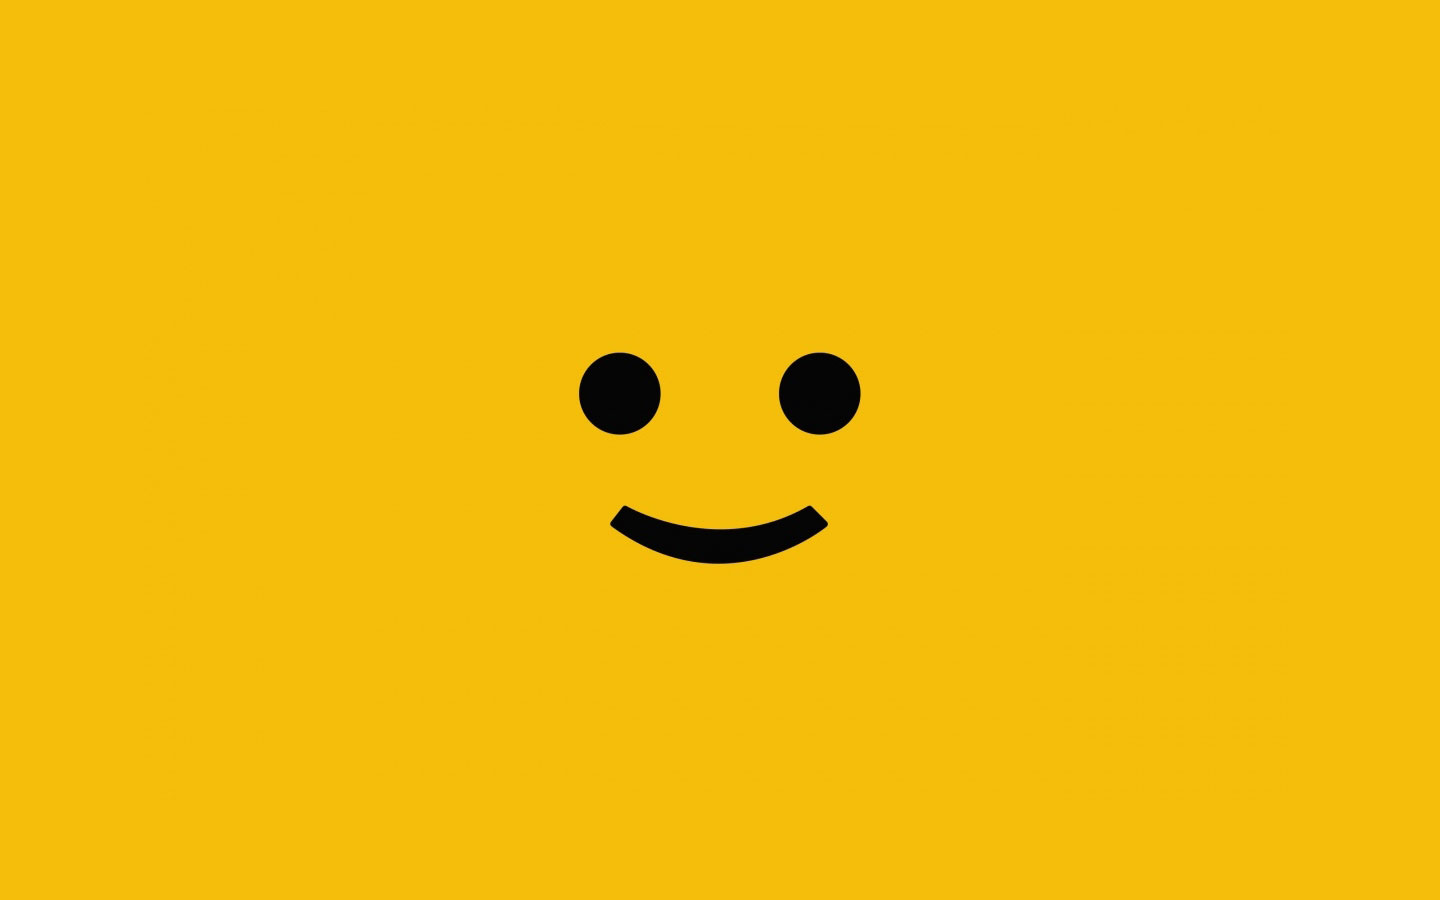 Free Widescreen Smiley Face Wallpaper Download Pictures to